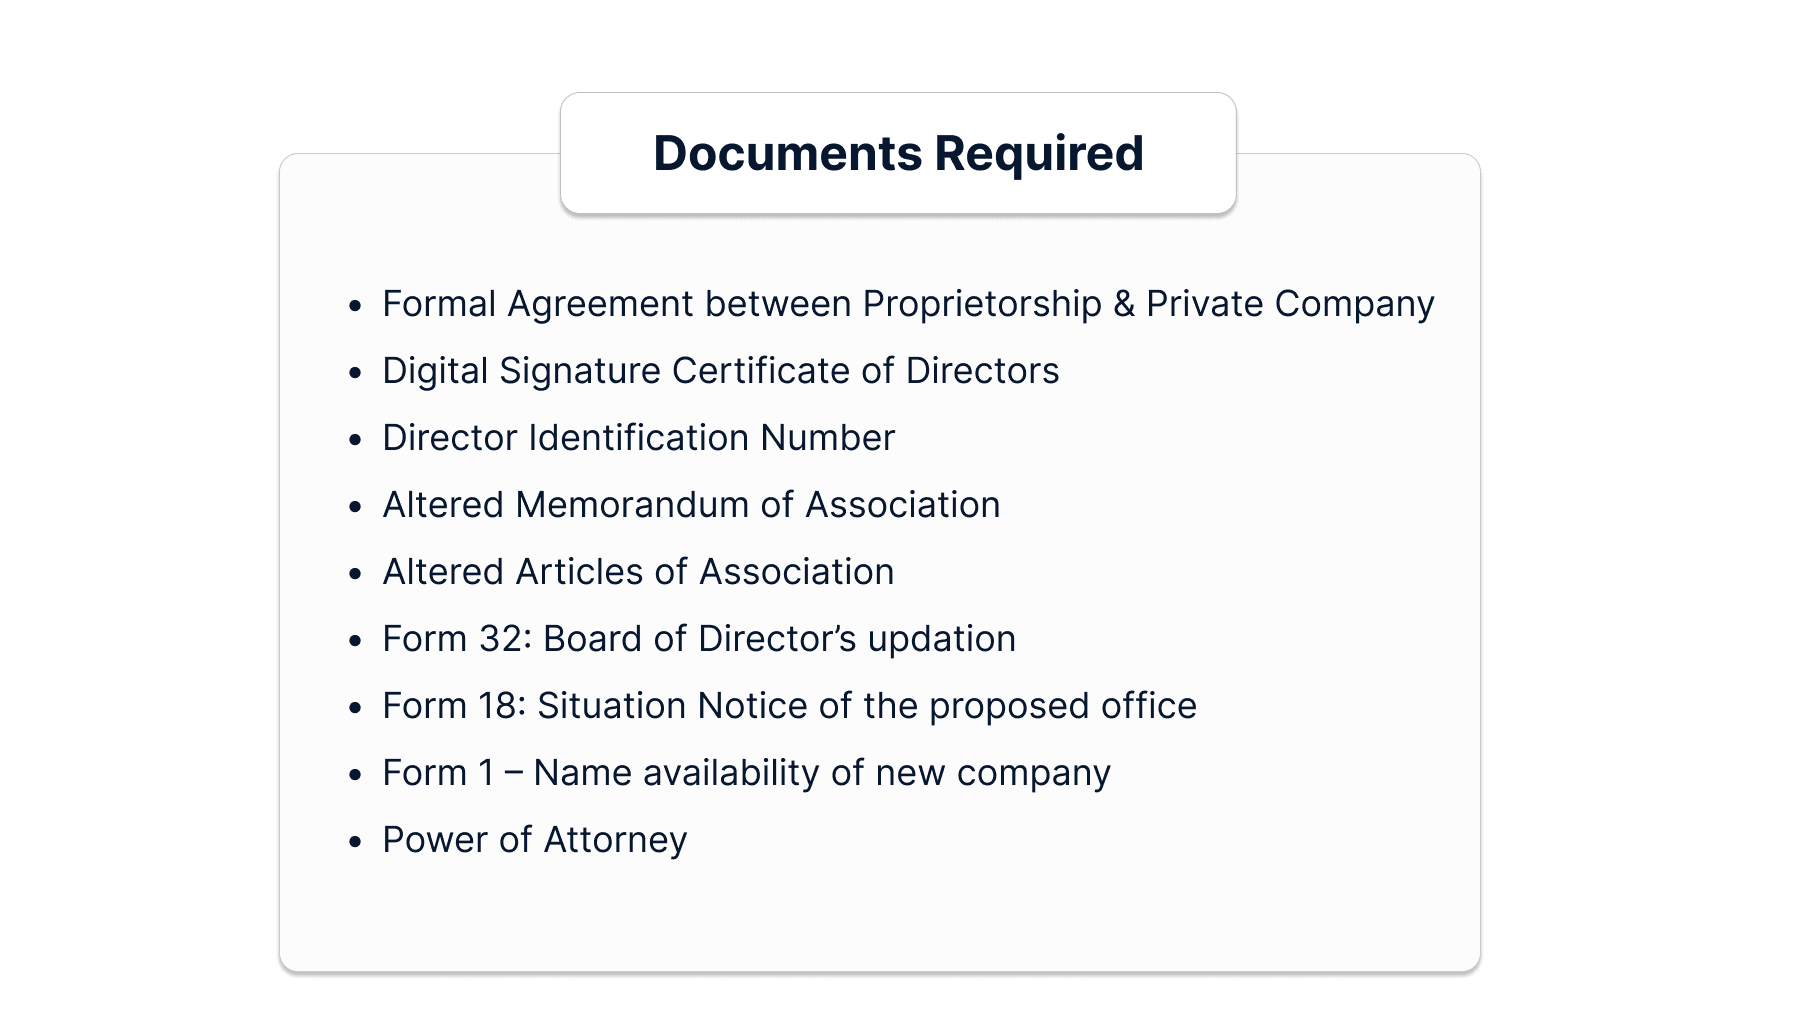 Documents required for converting a Sole Proprietorship to a Private Limited Company in India